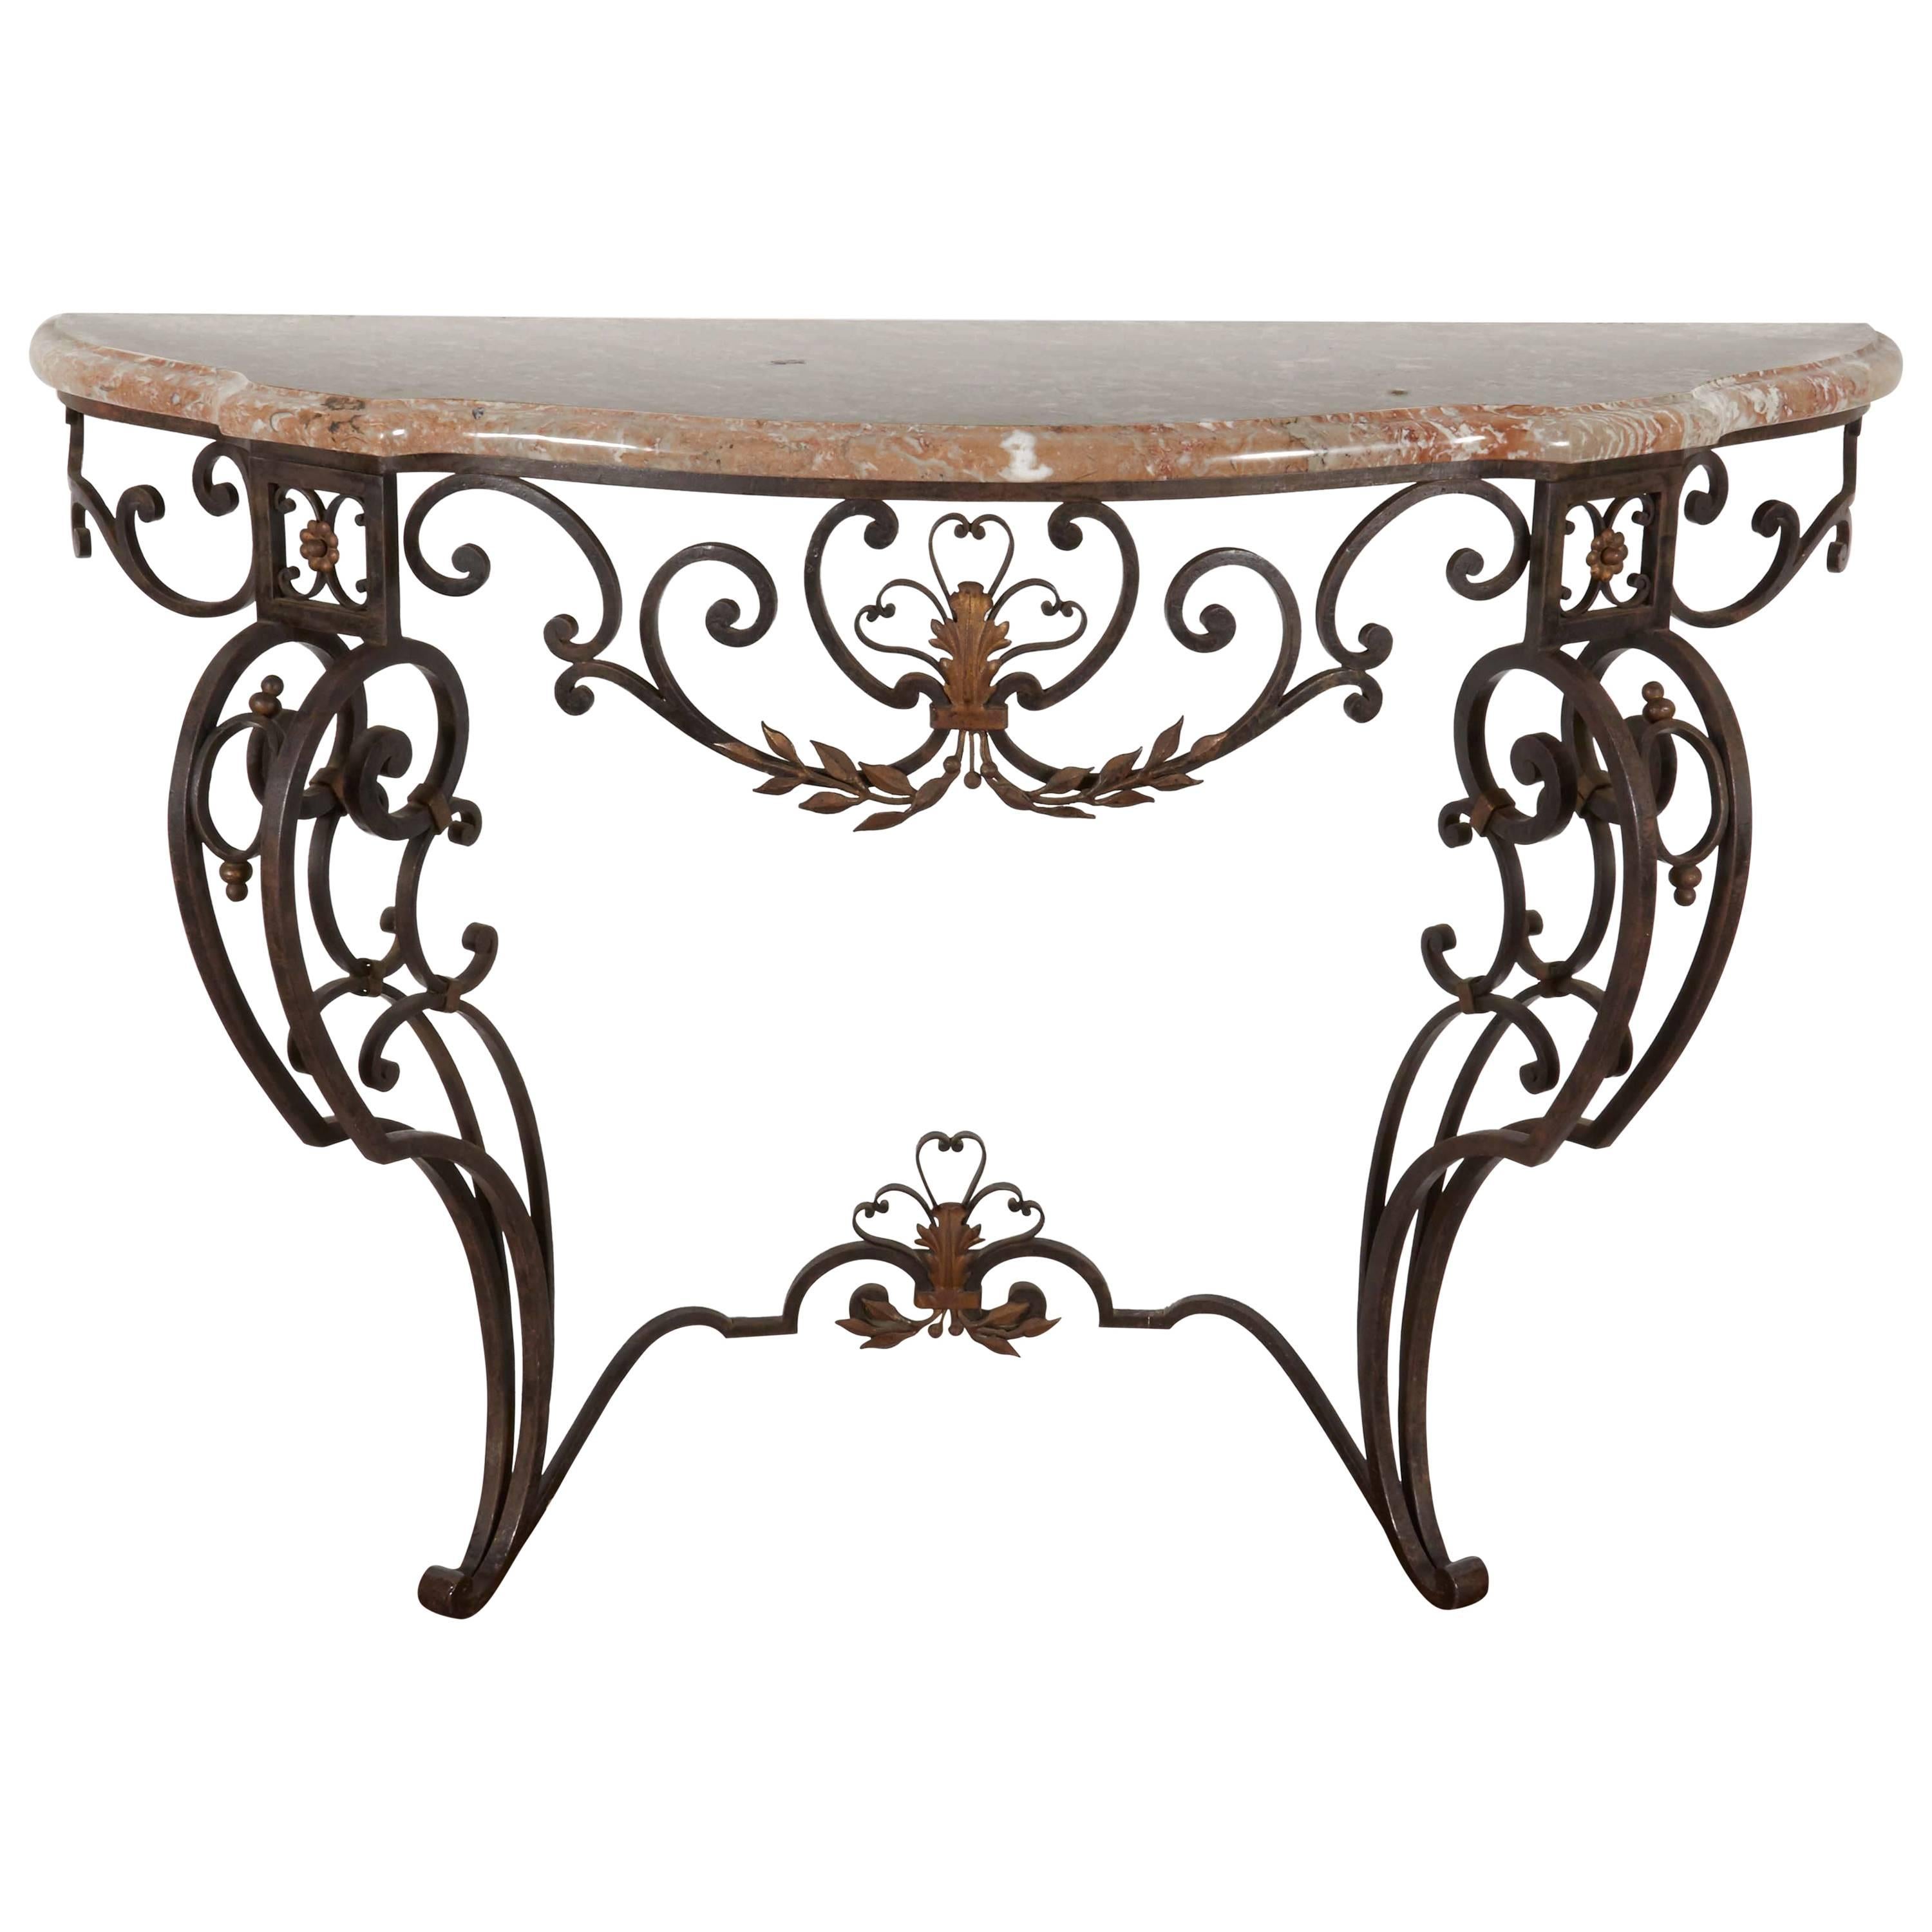 Iron and Marble-Top Demilune Console For Sale